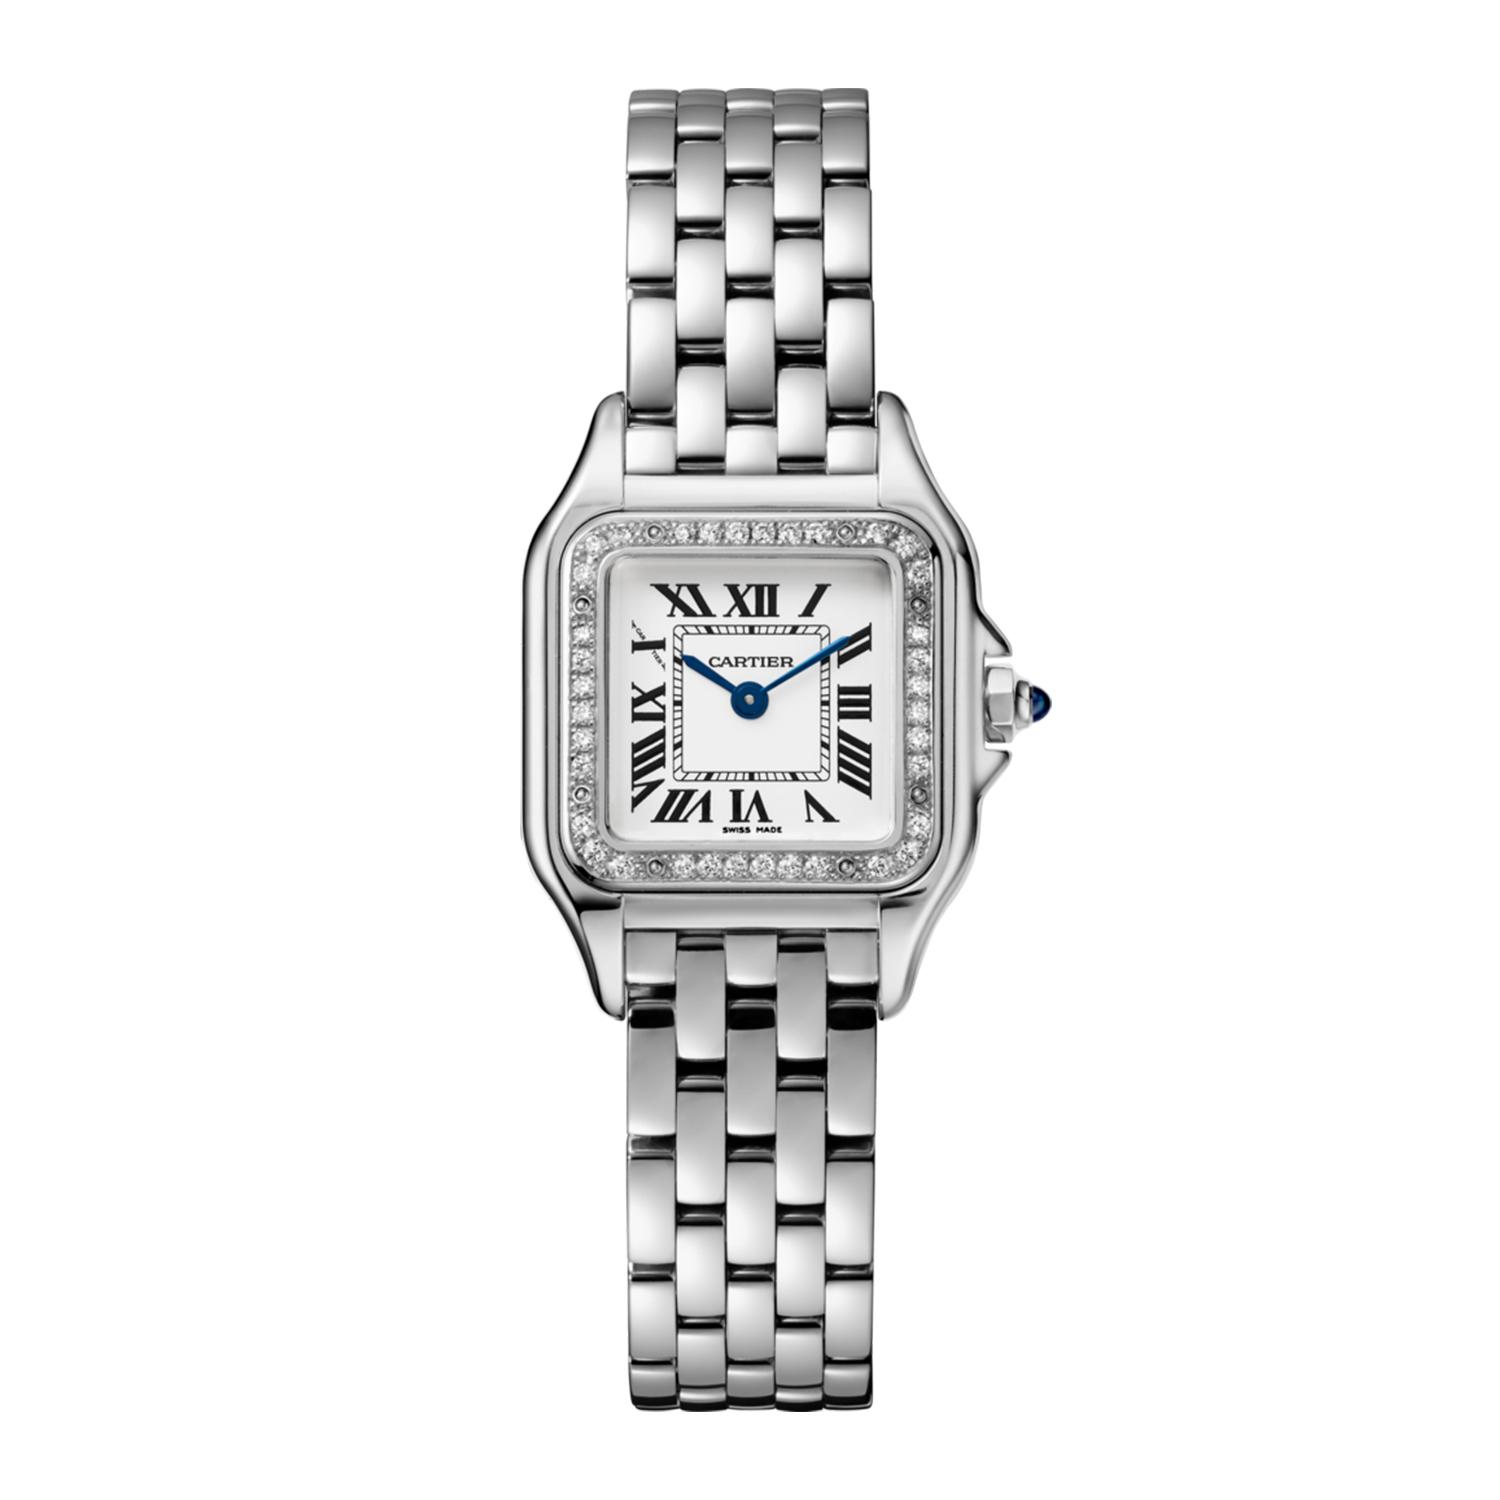 Panthere De Cartier Watch with Diamond Case, Small